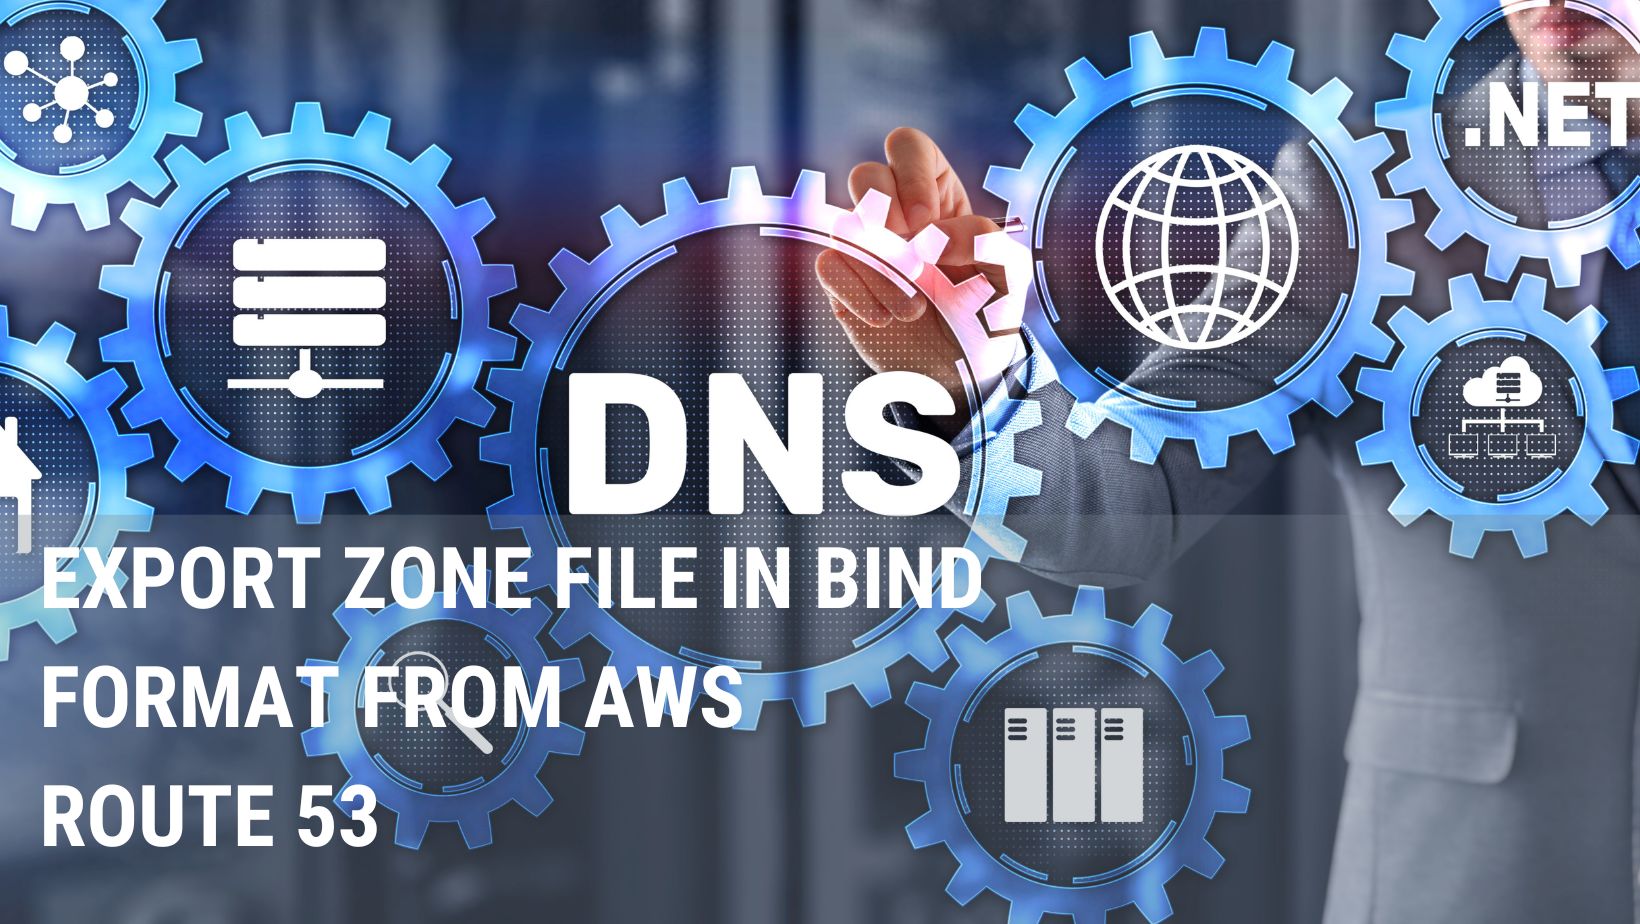 Export Zone File in Bind Format from AWS Route 53